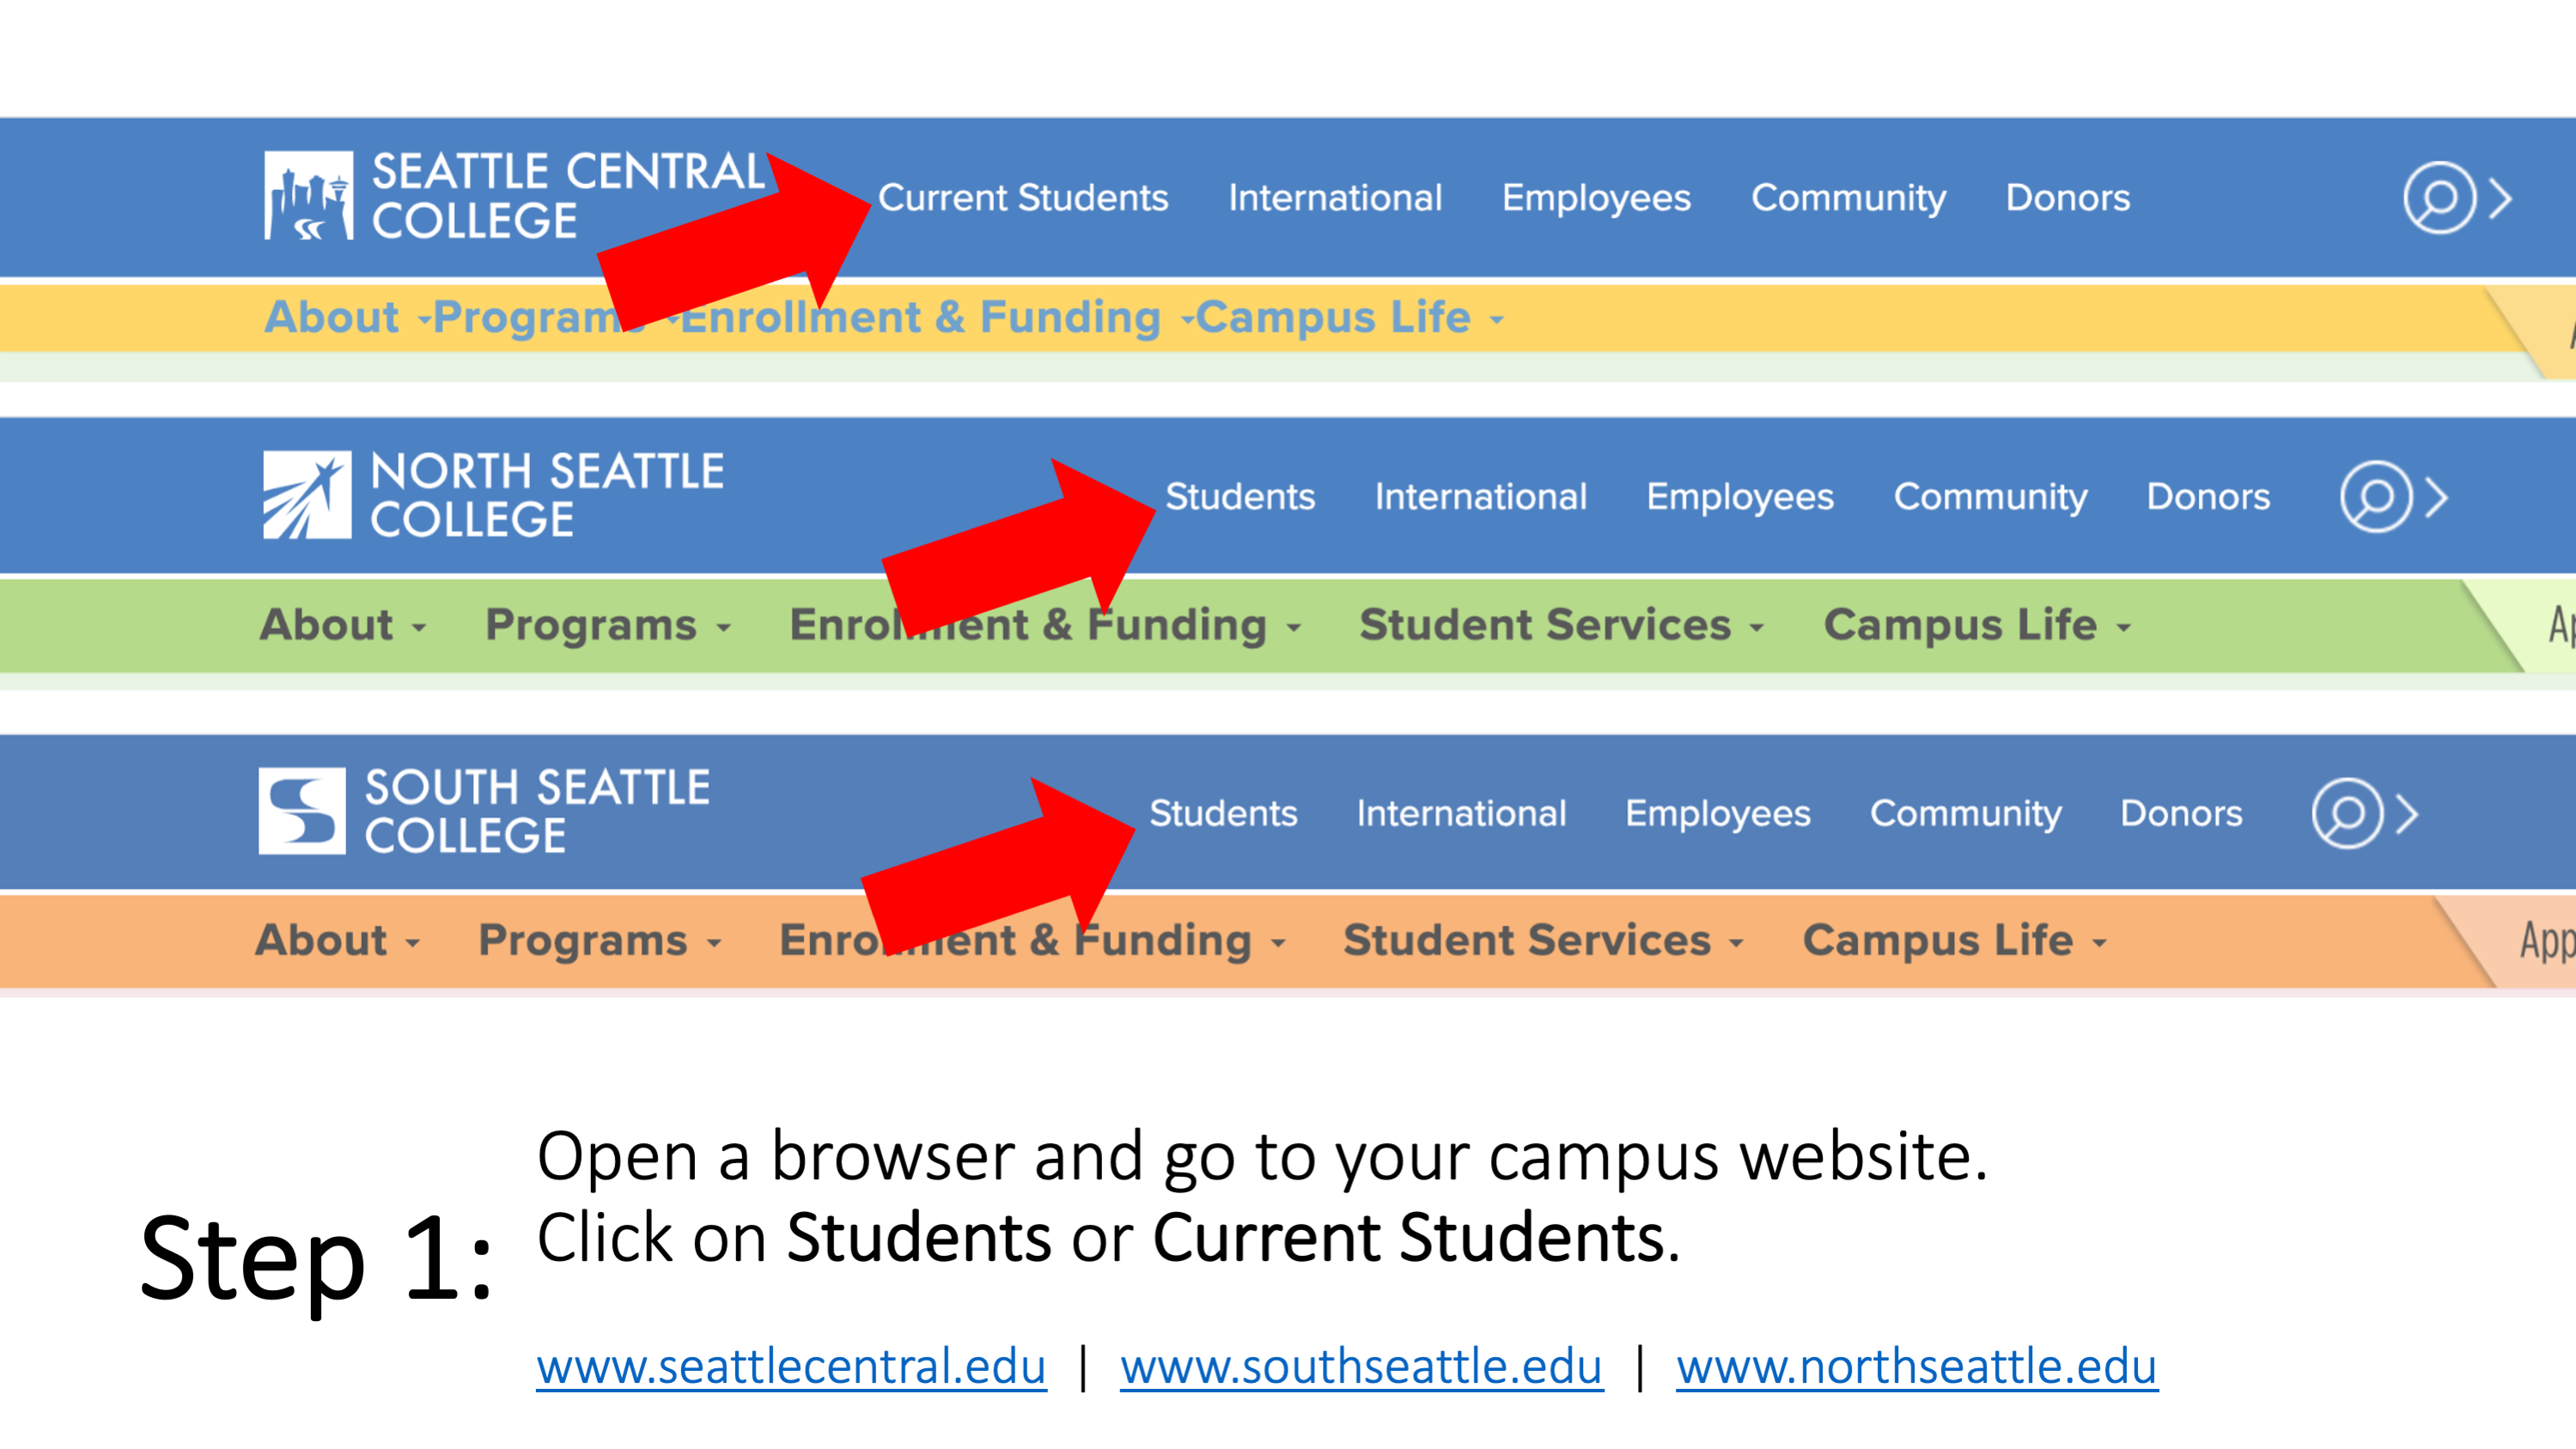 Slide 2 - Step 1: Open a browser and go to your campus website.  Click on Students or Current Students. www.seattlecentral.edu , www.southseattle.edu , or www.northseattle.edu. 